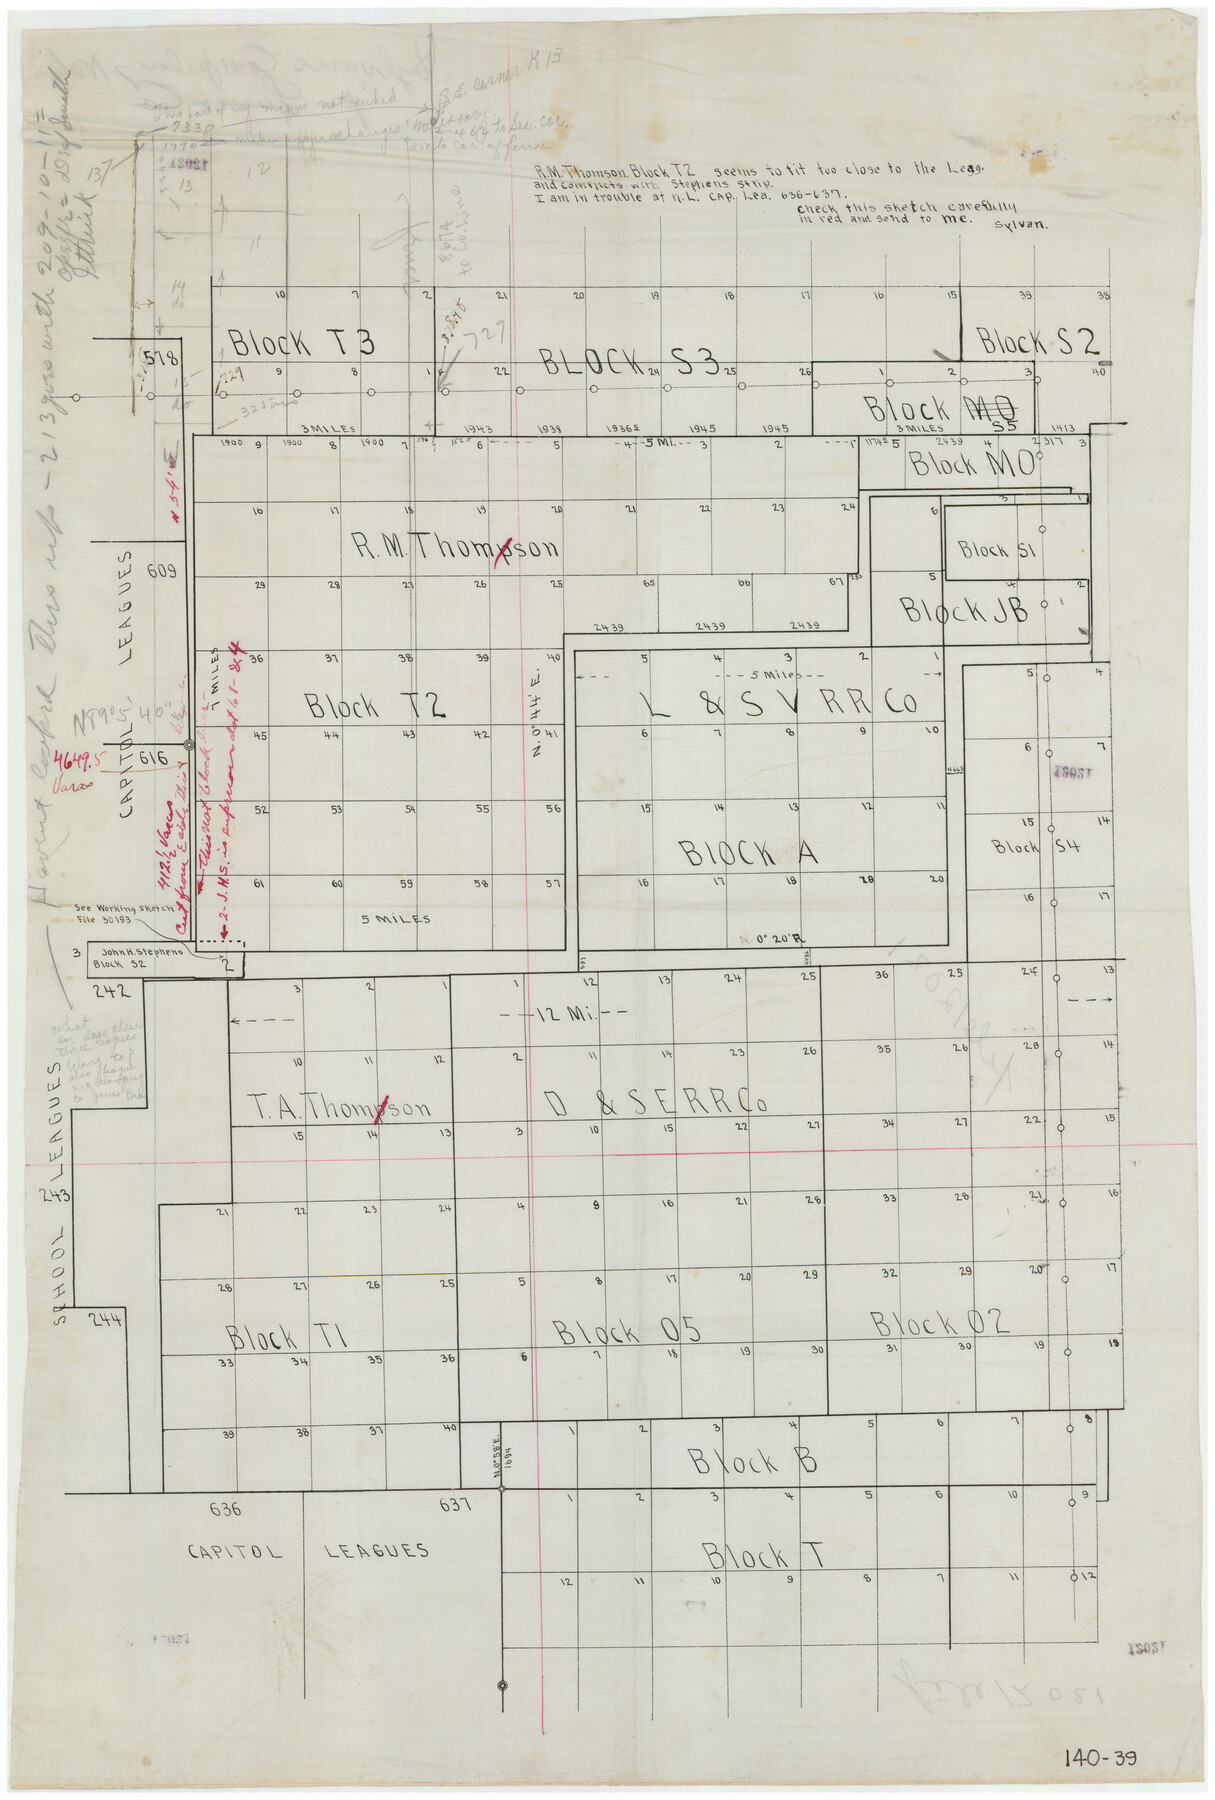 91056, [R. M. Thompson Block T2 and John H. Stephens Block S2 Conflict], Twichell Survey Records